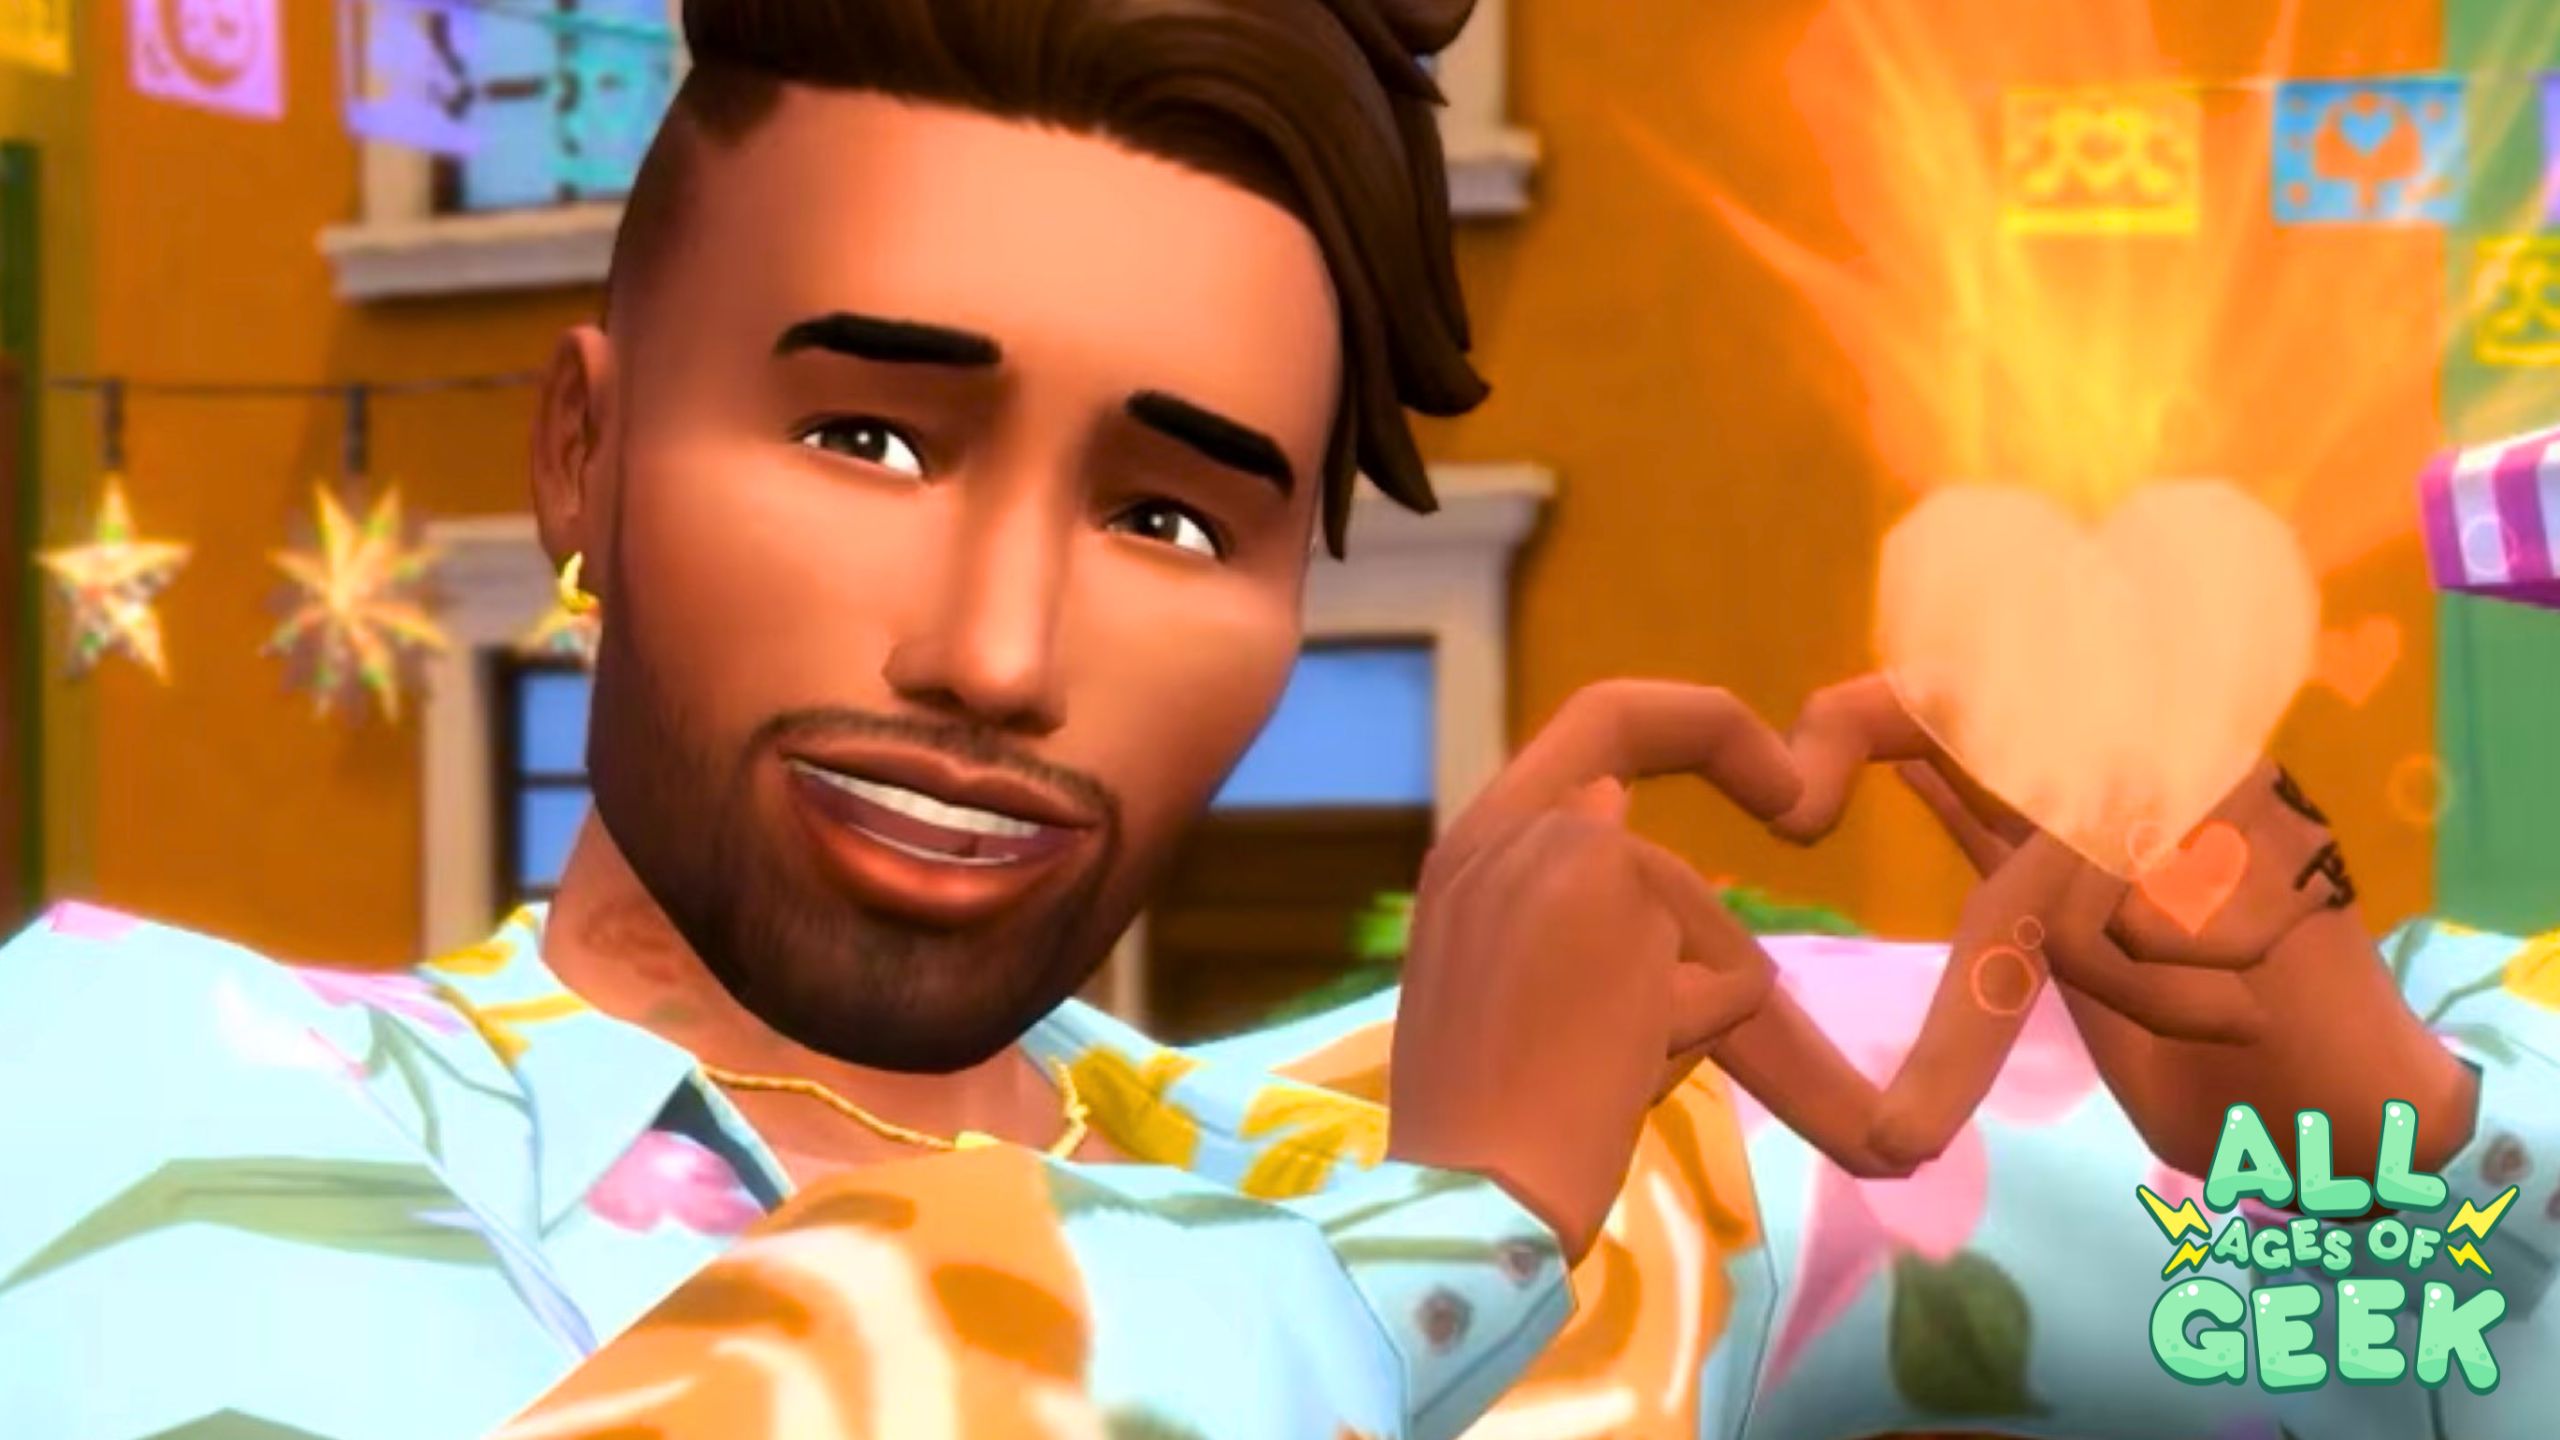 The Sims 4 Lovestruck Expansion Pack: Everything You Need to Know!